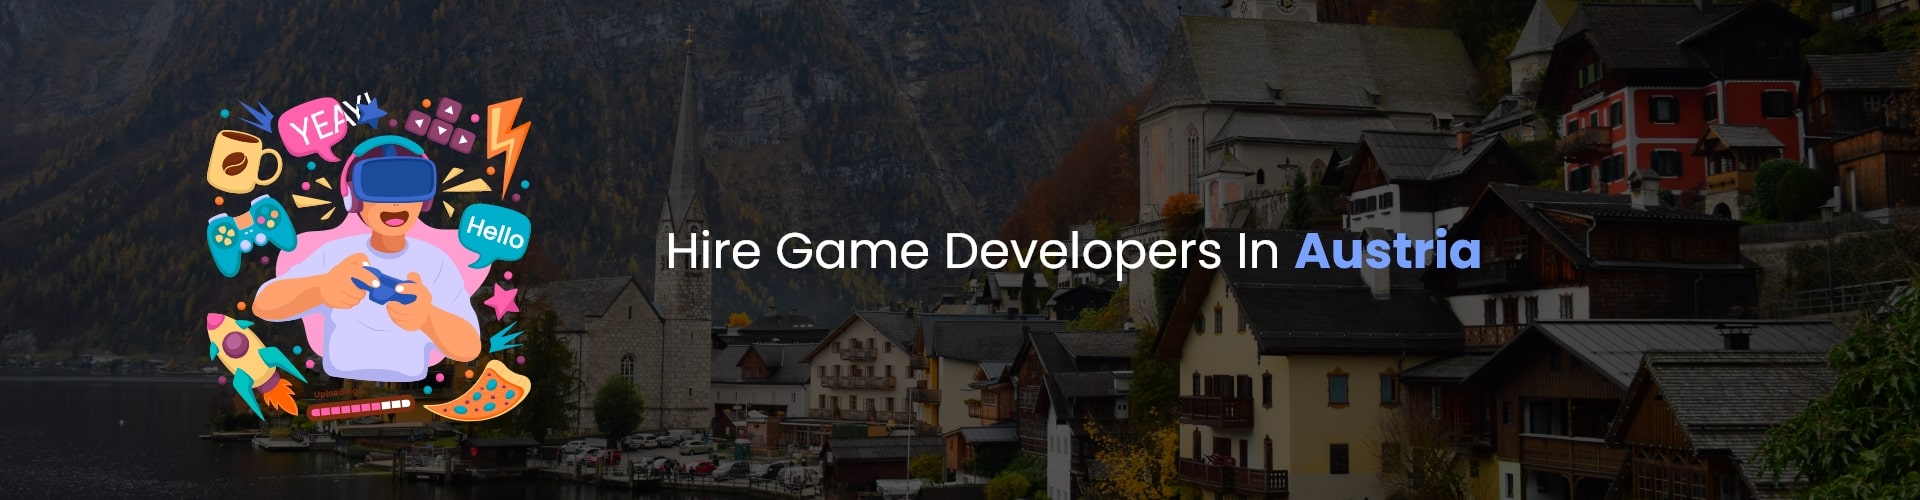 hire game developers in austria